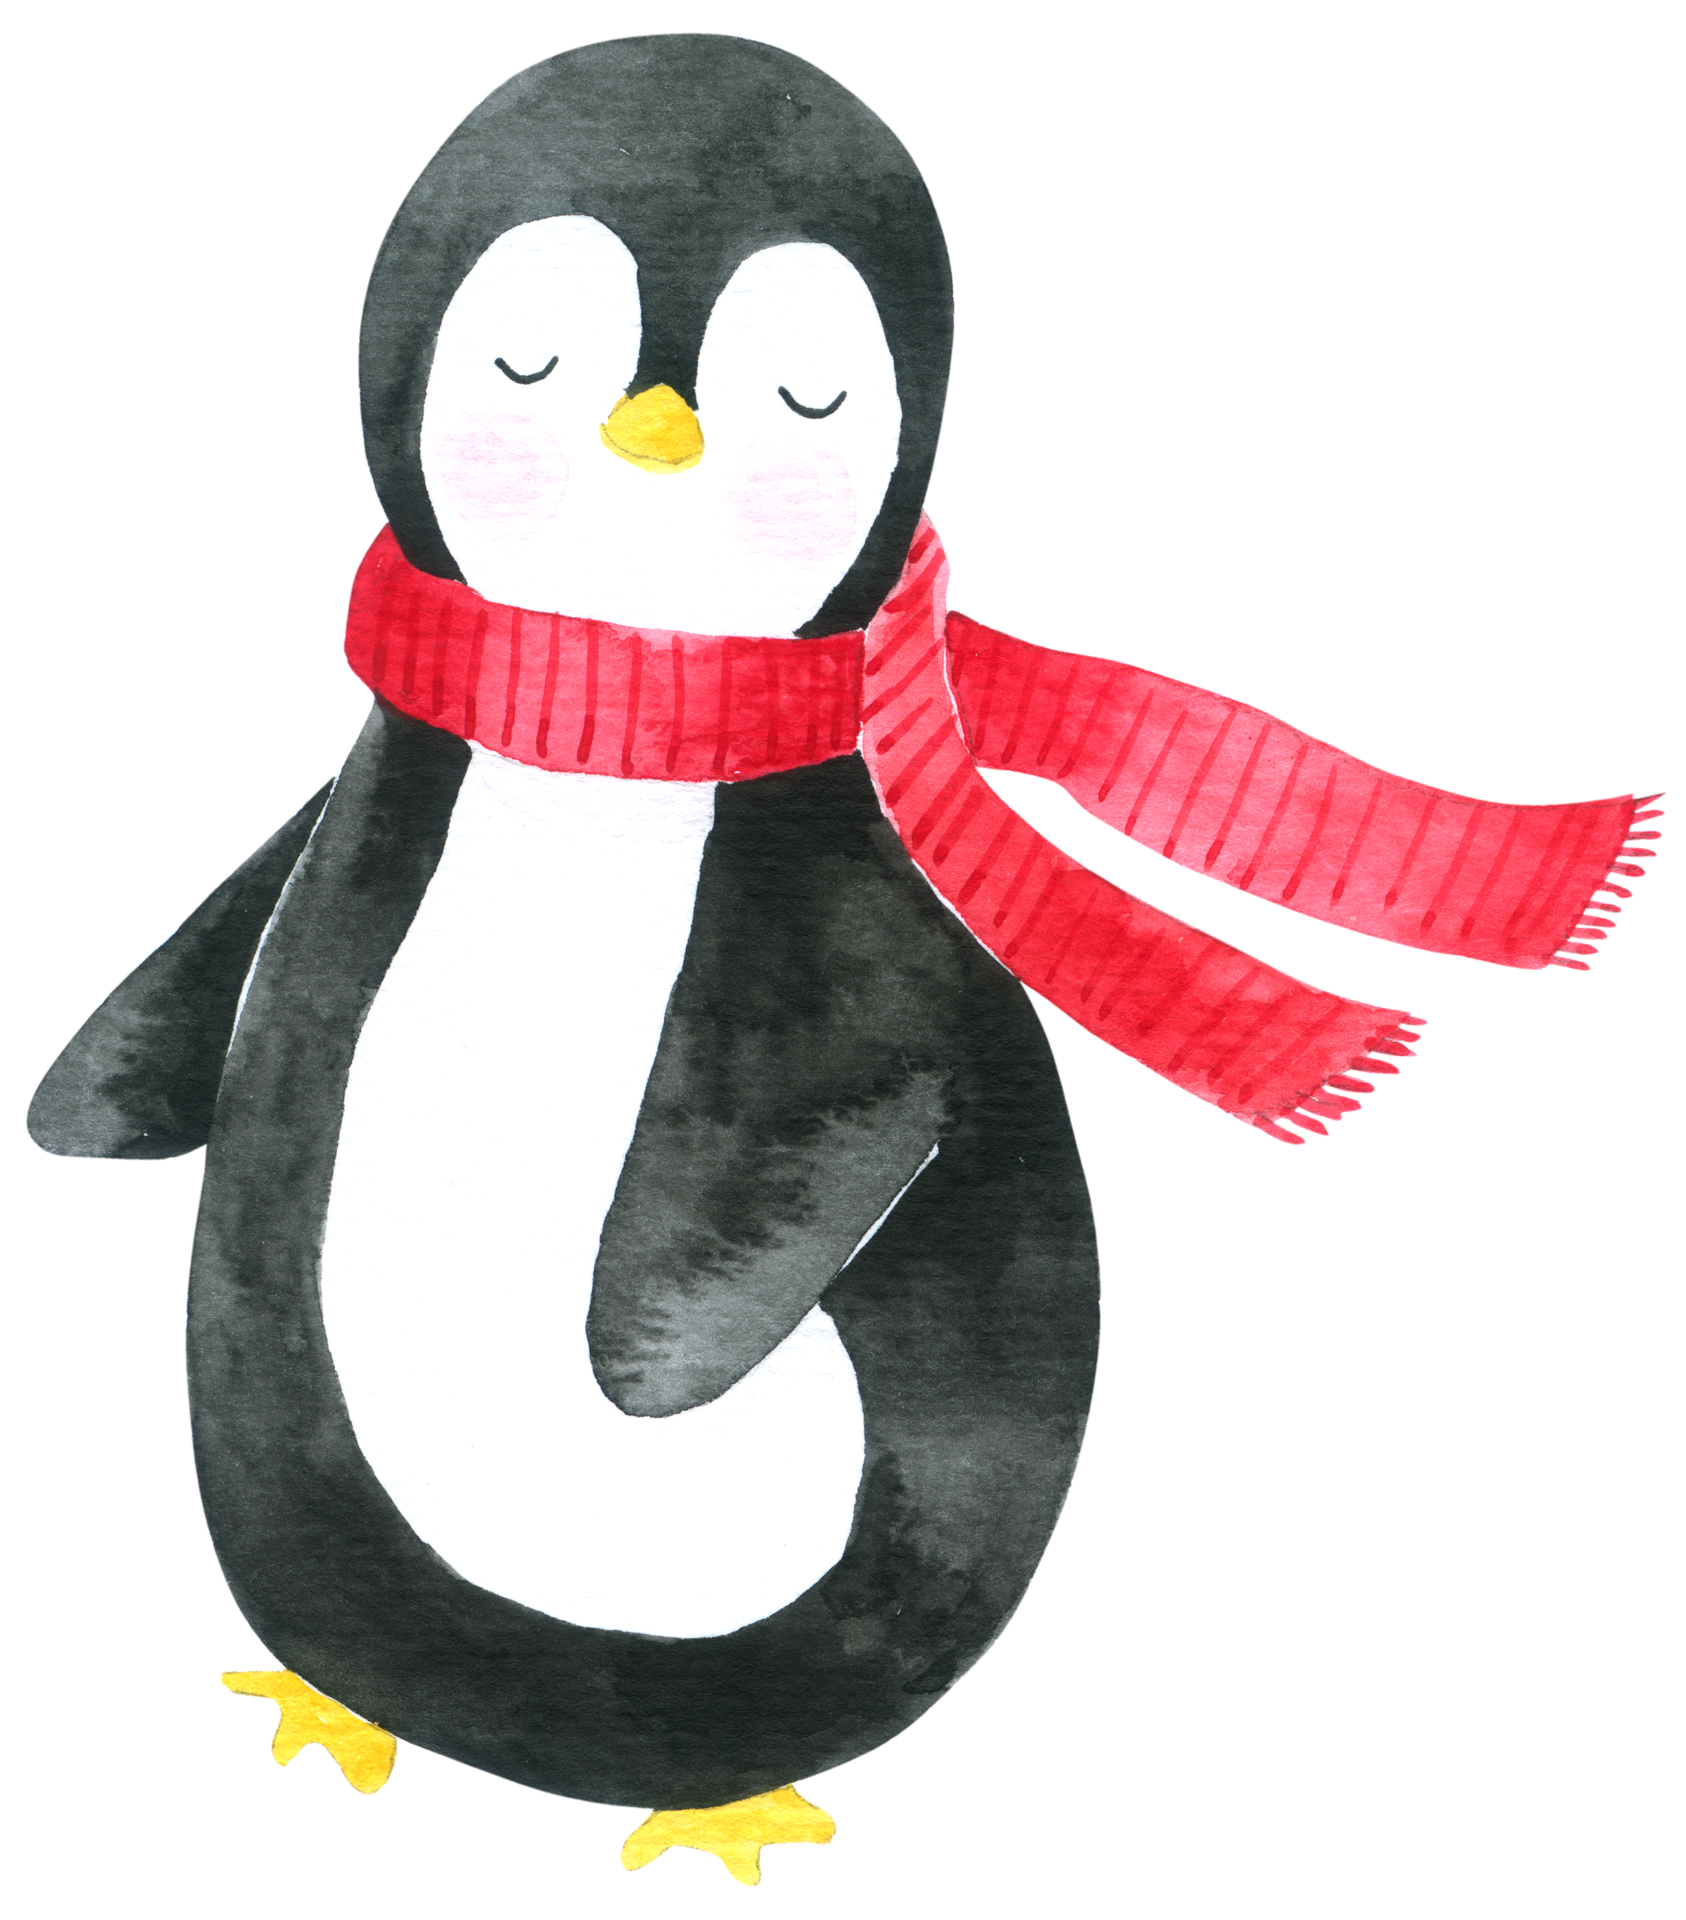 Penguin PNG Free Images with Transparent Background - (571 Free Downloads)